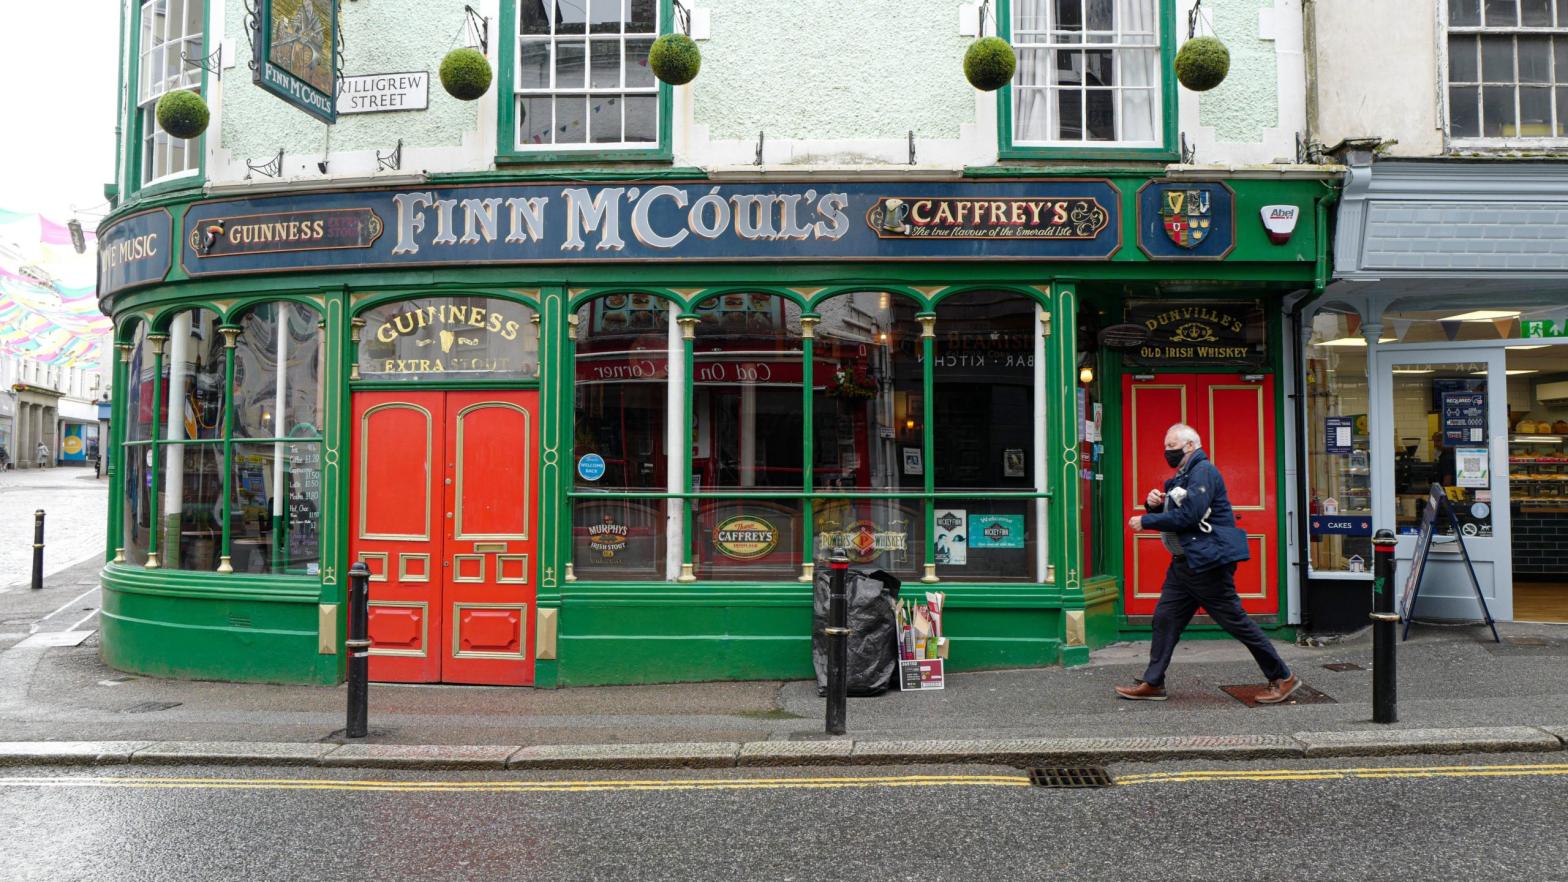 Finn McCouls pub on June 25, 2021 in Falmouth, England.  (Photo: Hugh Hastings, Getty Images)